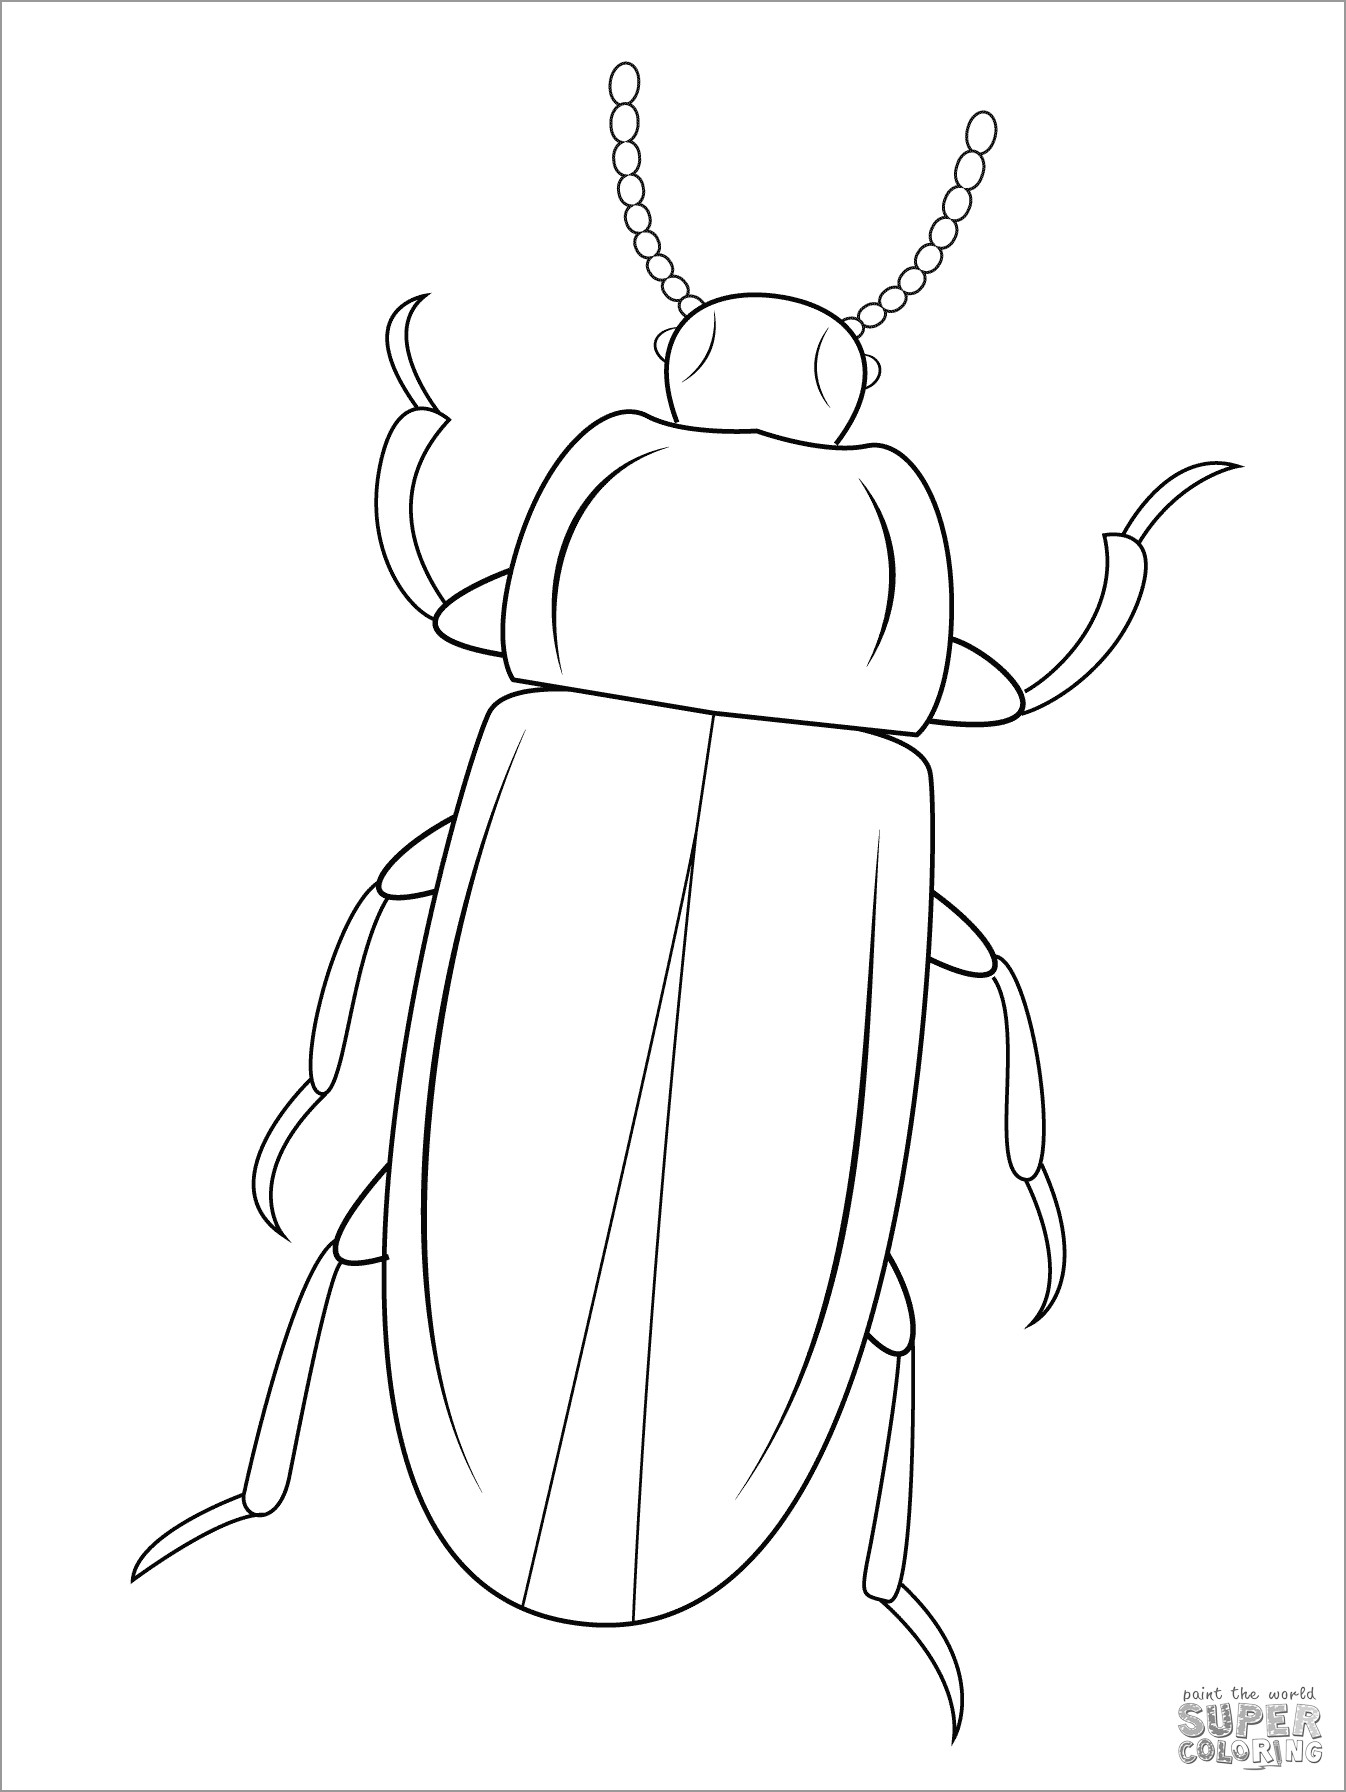 Mealworm Beetle Coloring Page